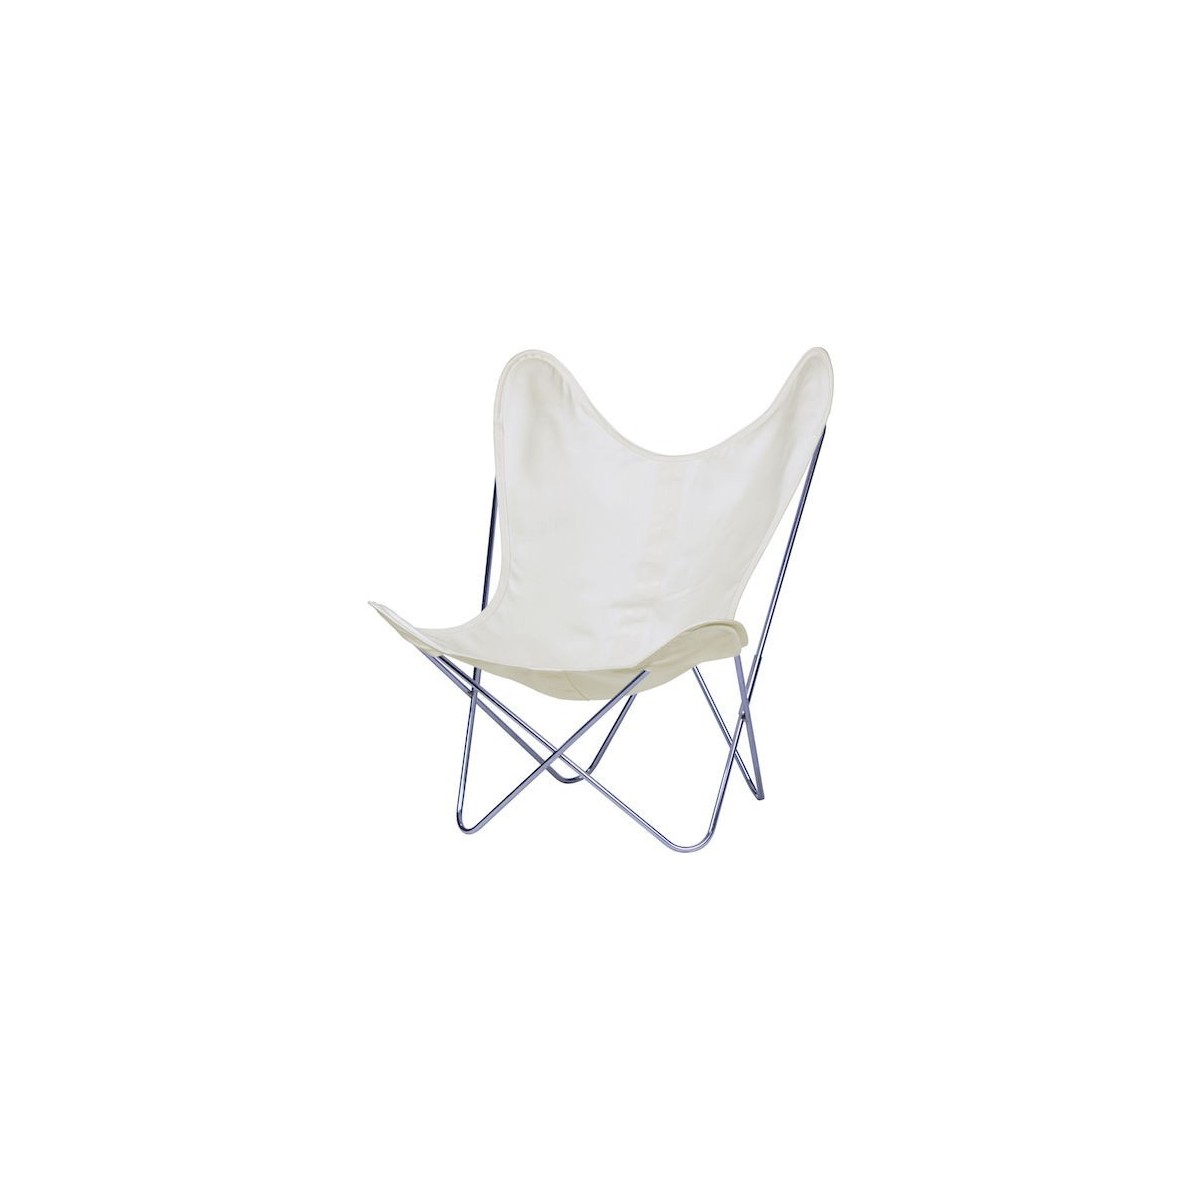 ecru canvas - chromed structure - AA Butterfly chair